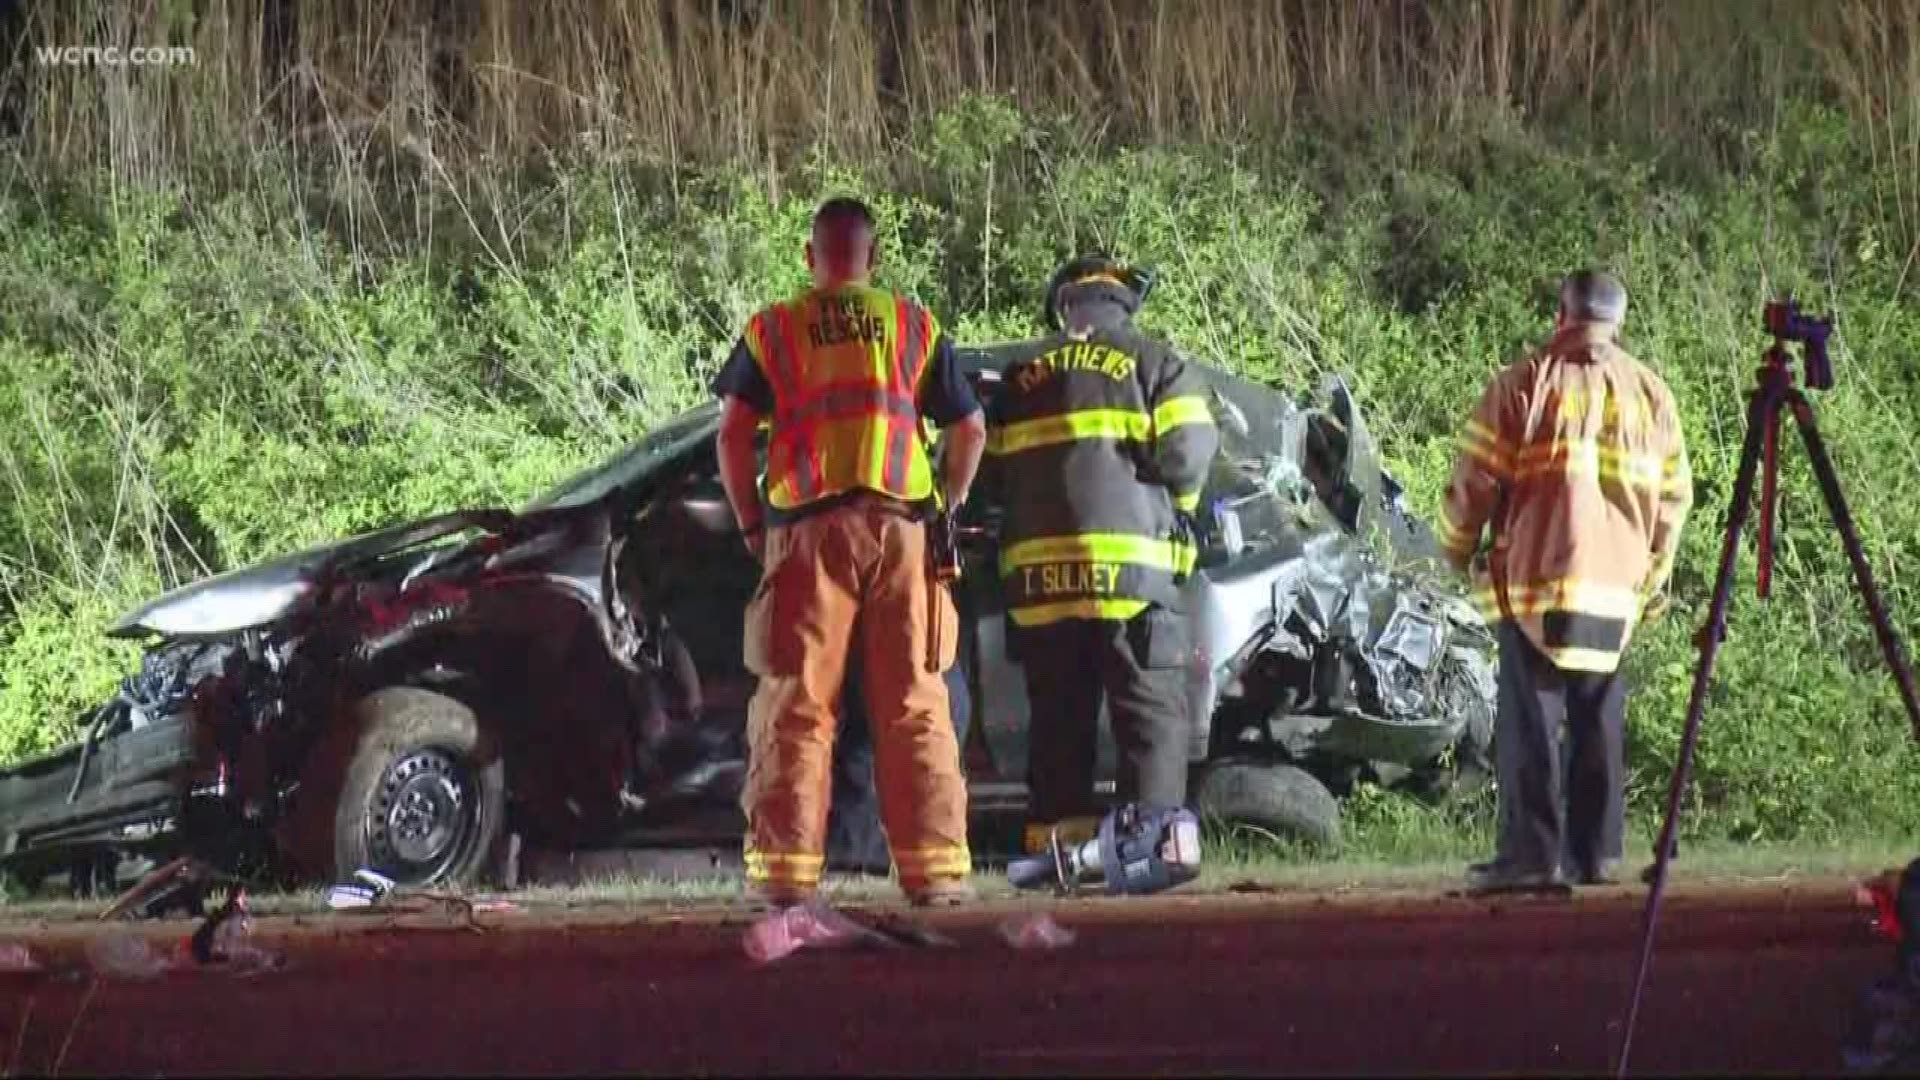 Five people were injured in a crash on Independence Boulevard in southeast Charlotte late Monday.